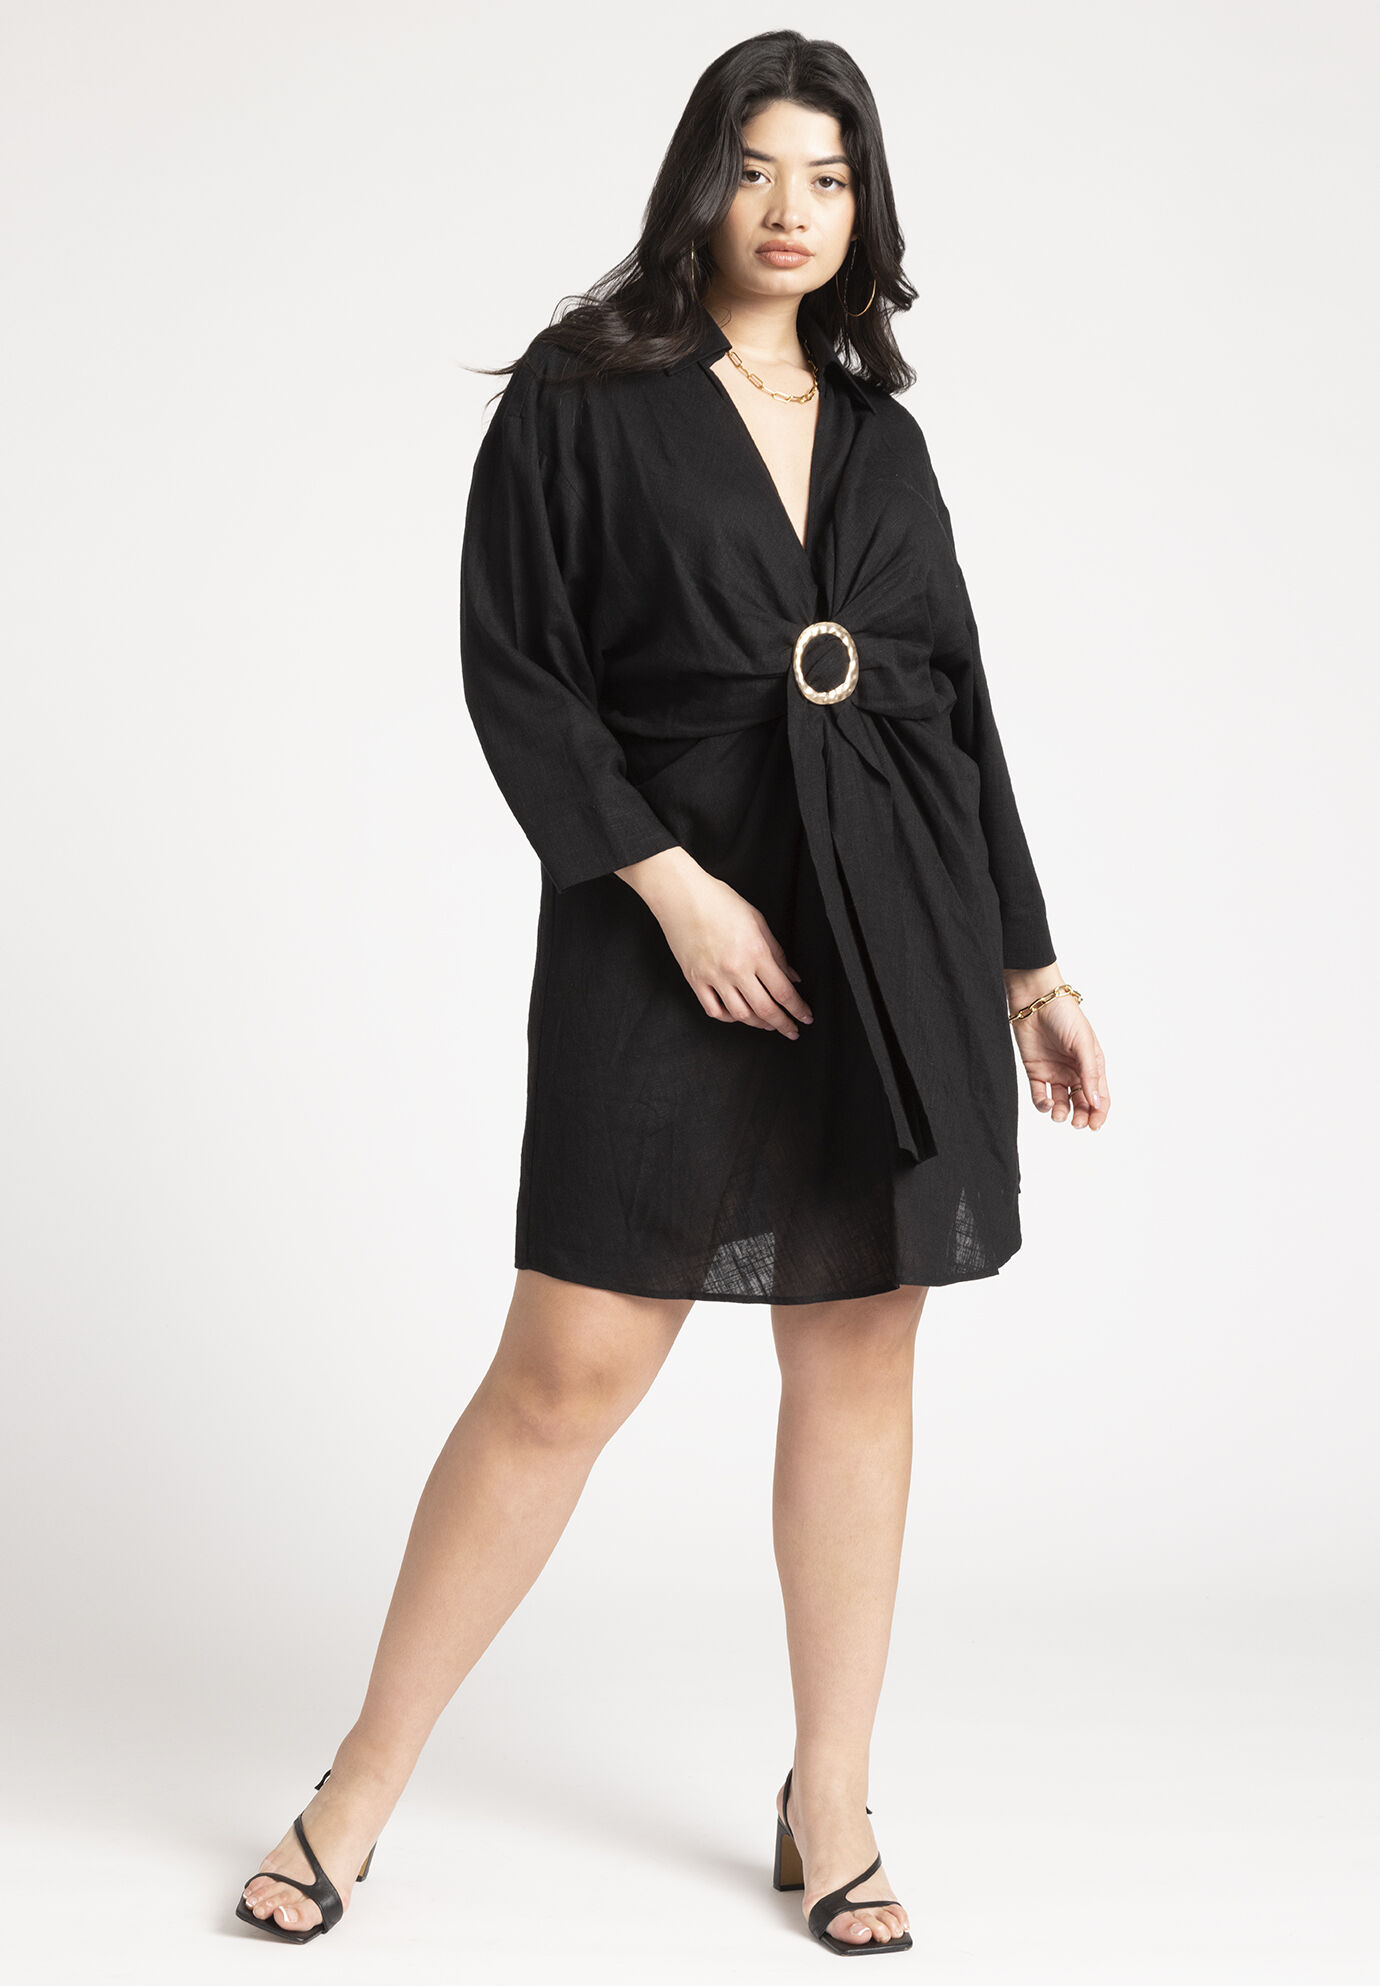 Plus Size Collared Dolman Long Sleeves Short Cover Up/Tunic